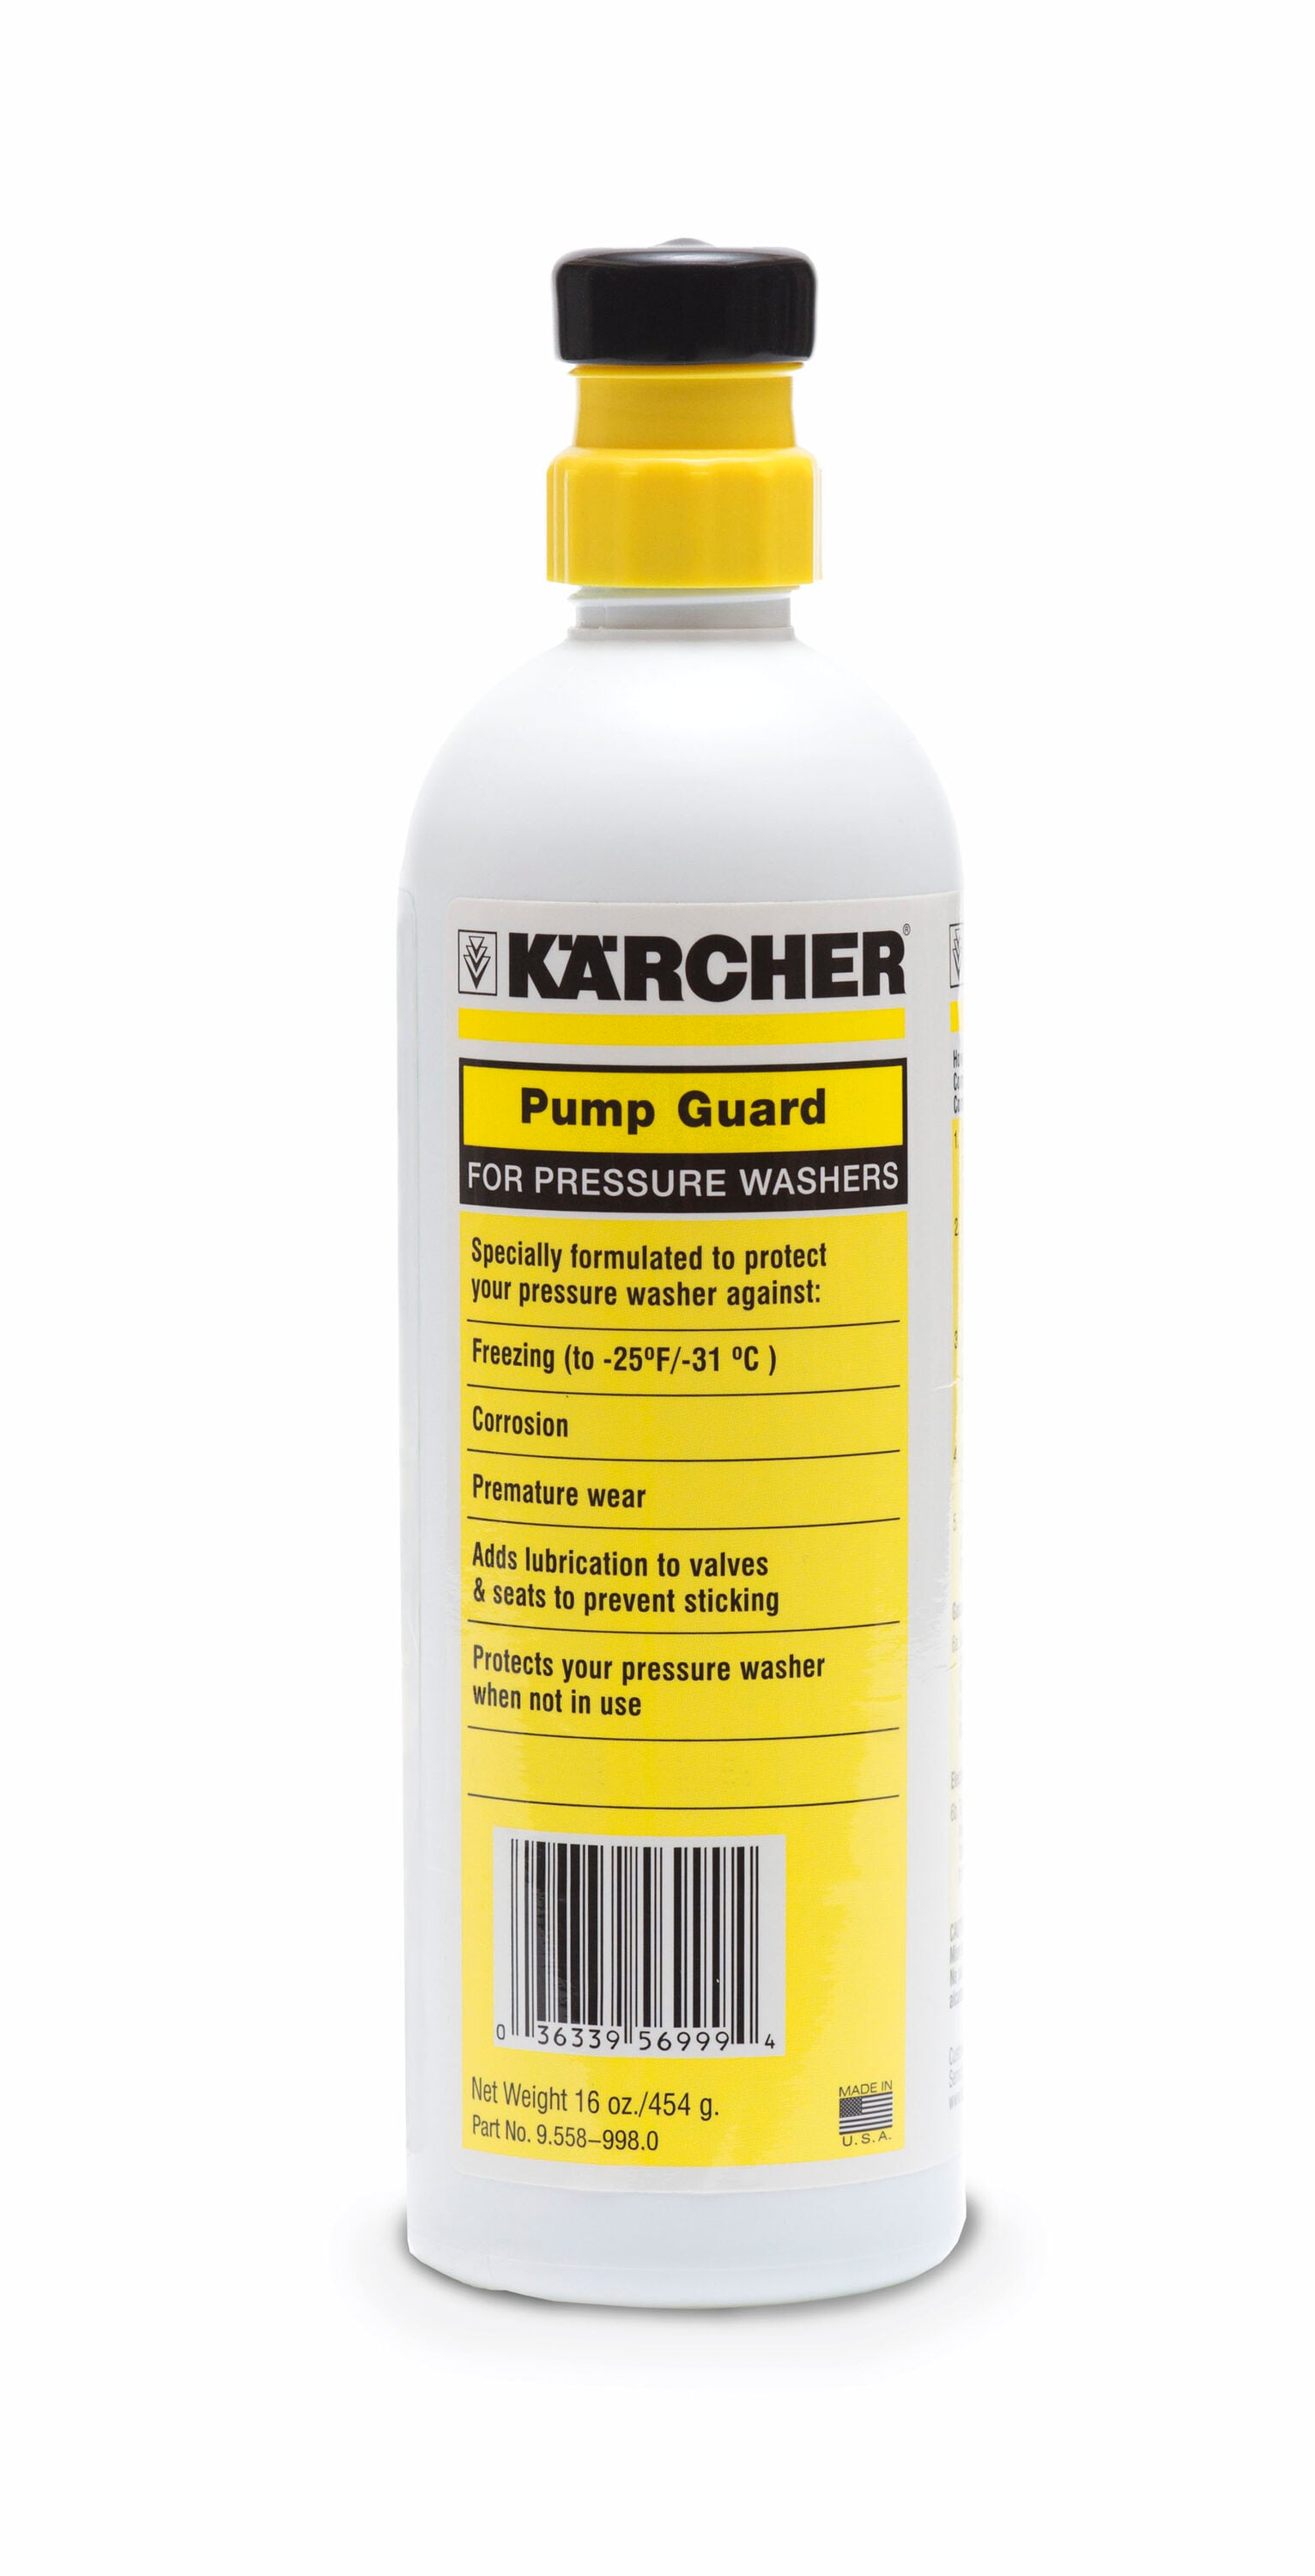 Karcher Pump Guard - Protects Pressure Washer from Corrosion & Freezing | Adds Lubrication to Valves & Seals | Pump Saver Solution -25º F -  9.558-998.0